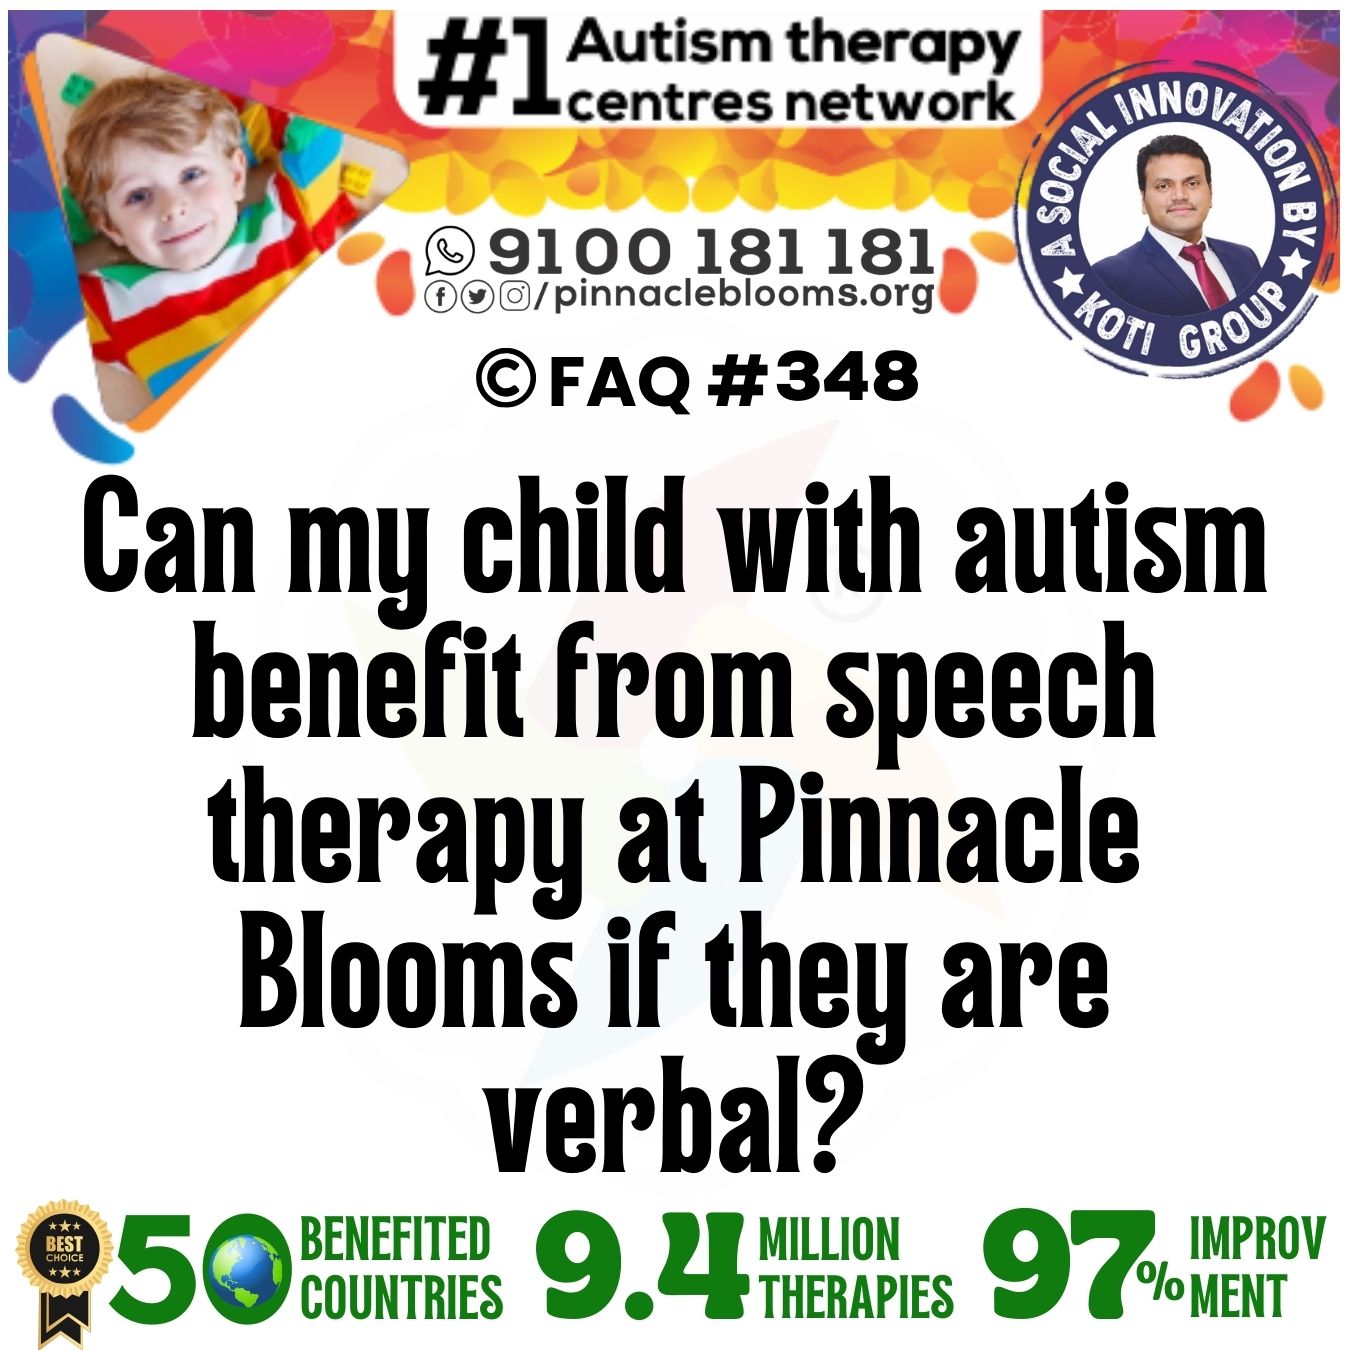 Can my child with autism benefit from speech therapy at Pinnacle Blooms if they are verbal?